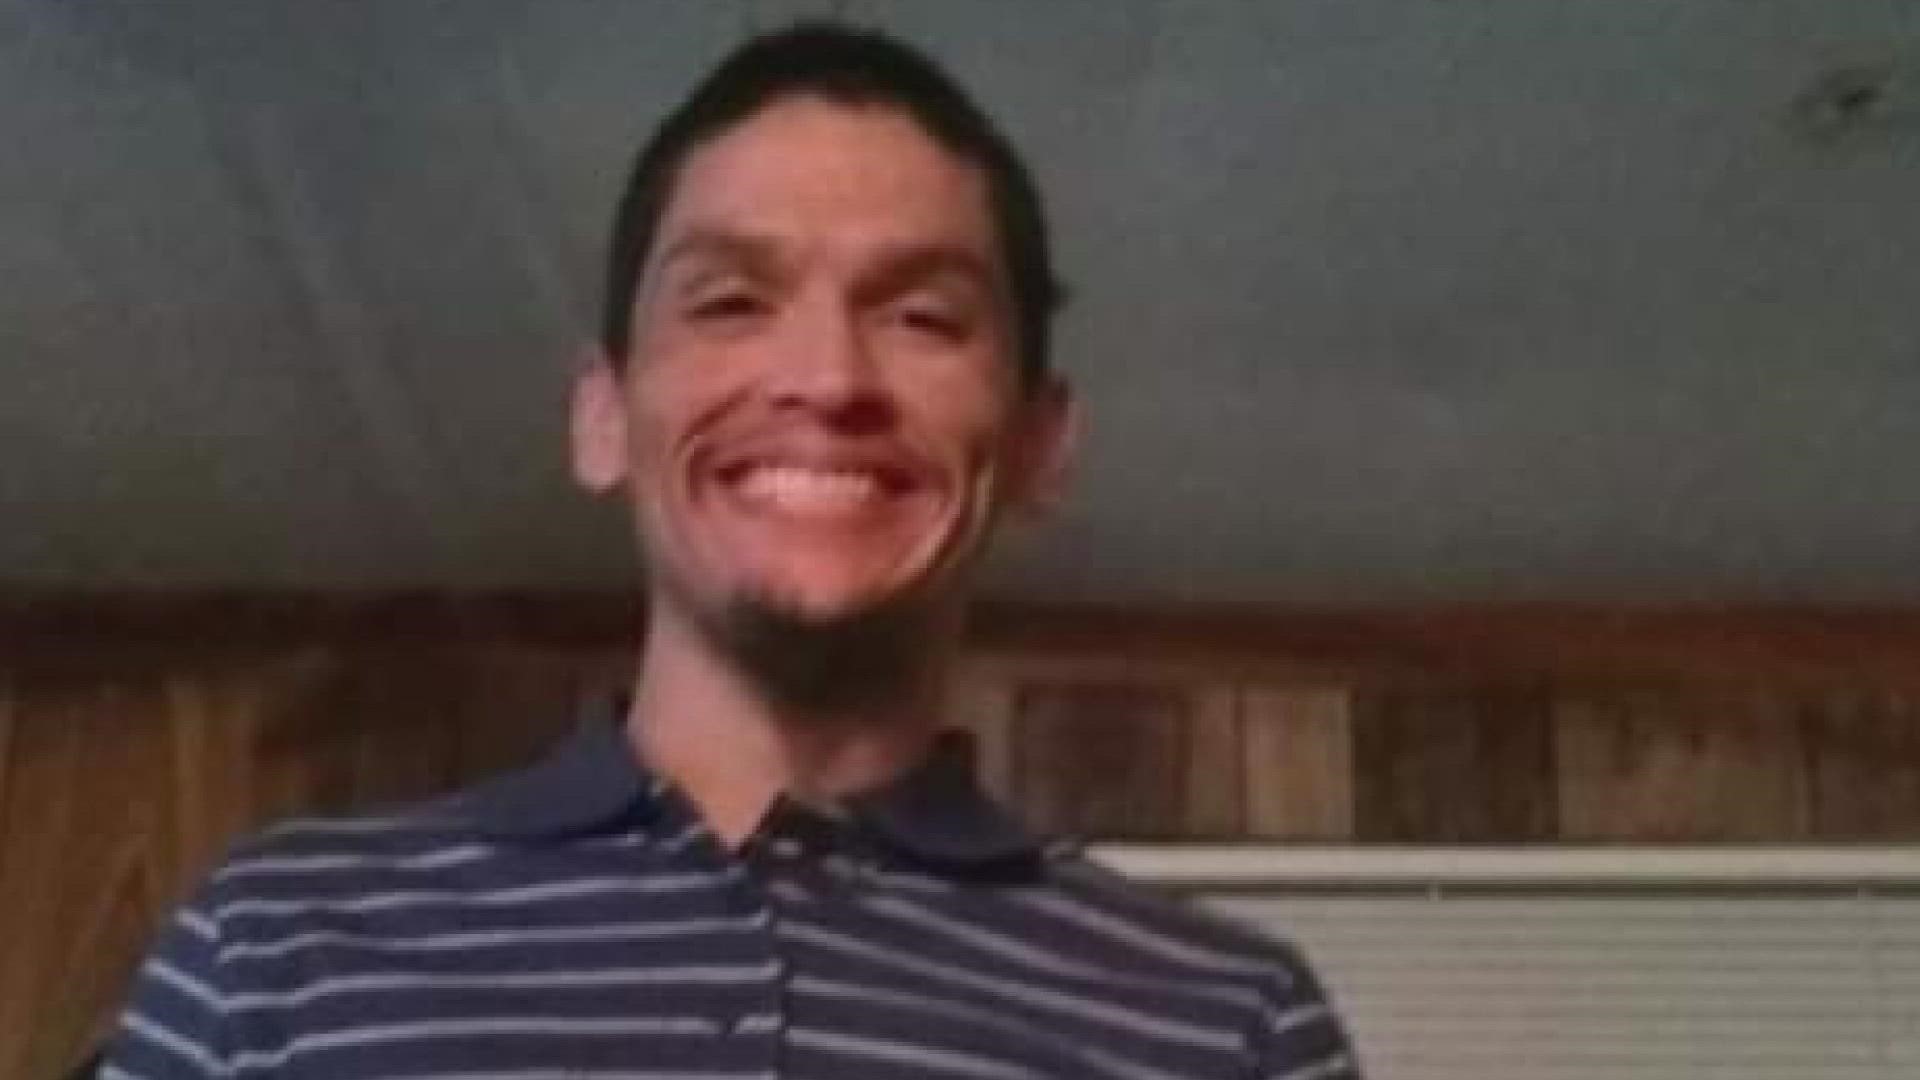 The search is intensifying for 34-year-old Joseph Adam Gomez- Silva who has been missing for the past 24 days after he walked out of his Tempe home.